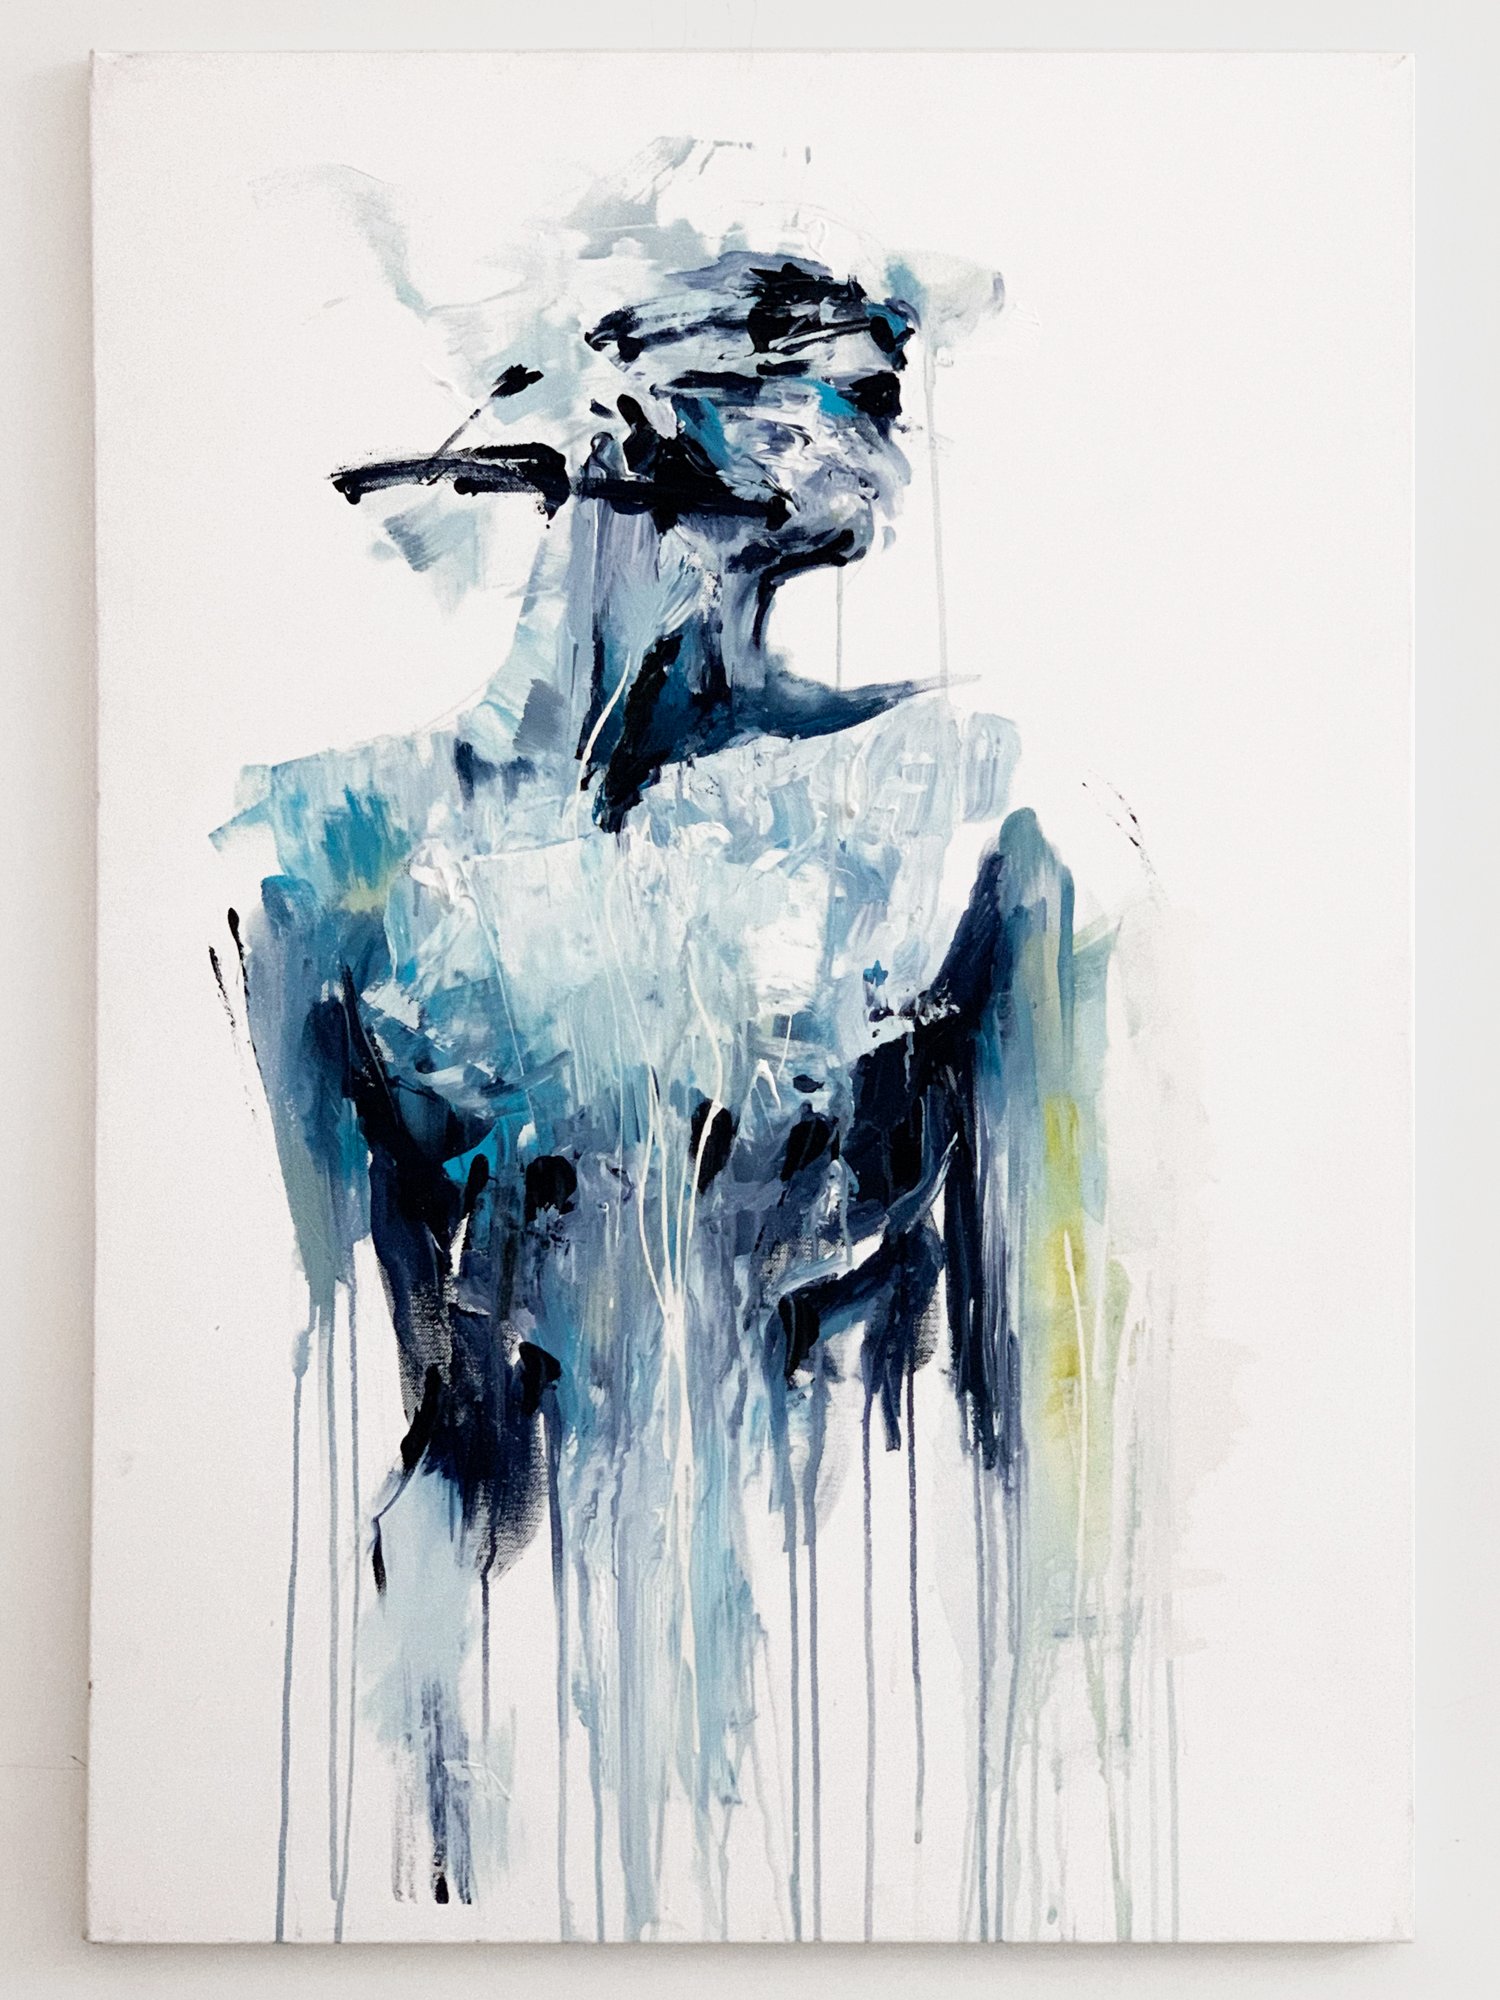 Agnes-Cecile the triumph of things (70x100 cm)